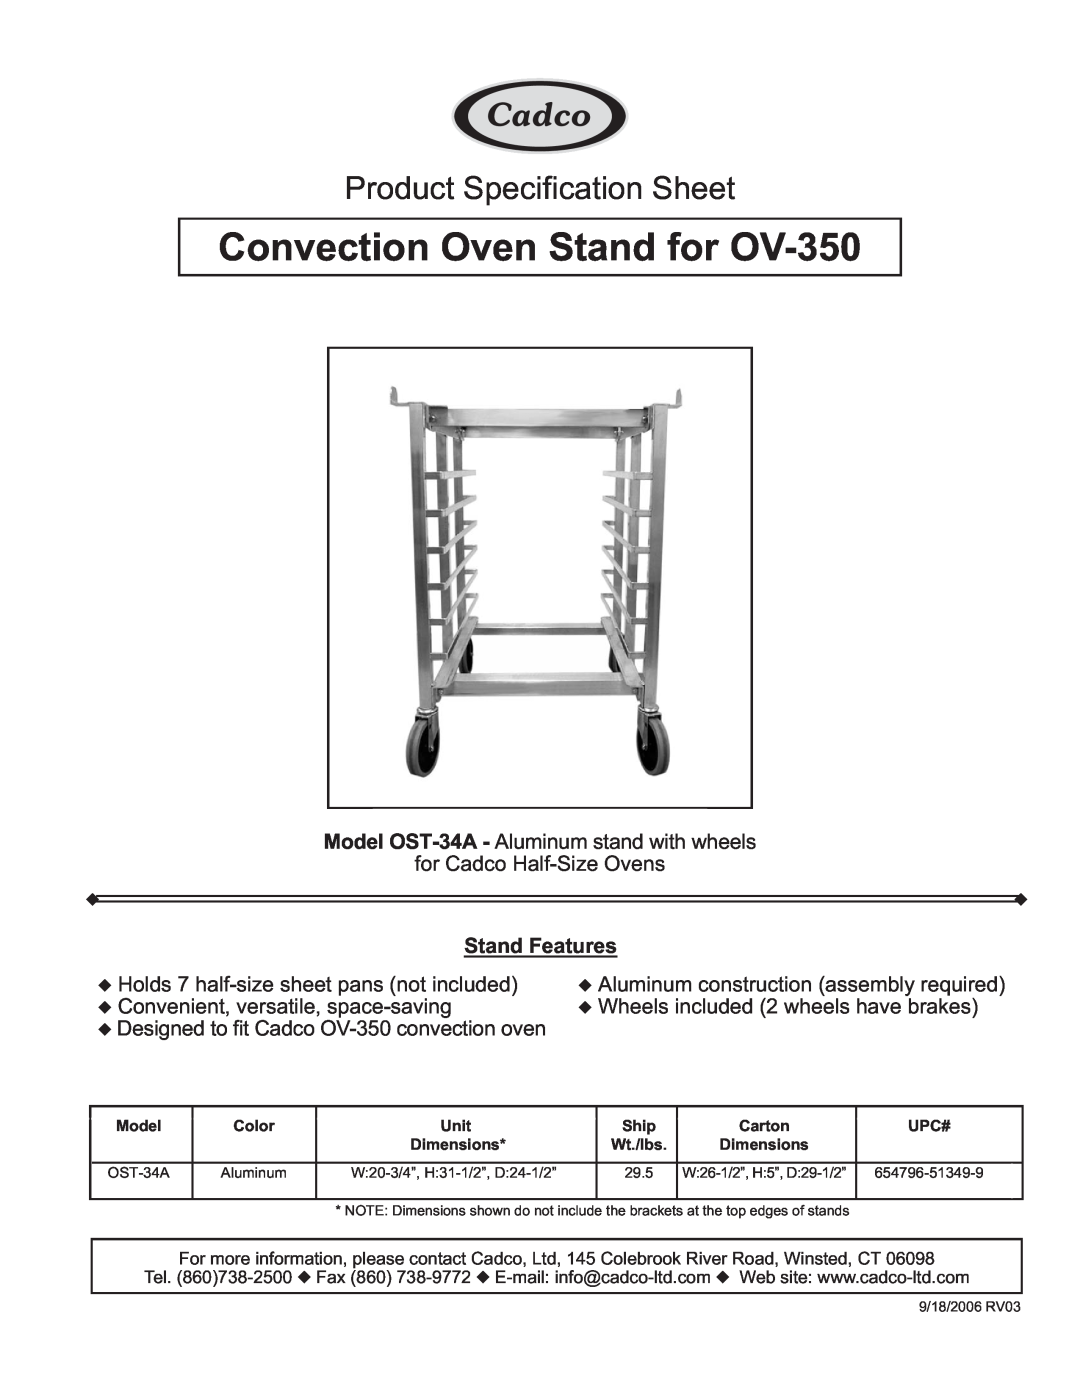 Cadco OST-34A specifications Convection Oven Stand for OV-350, Product Specification Sheet, Stand Features 